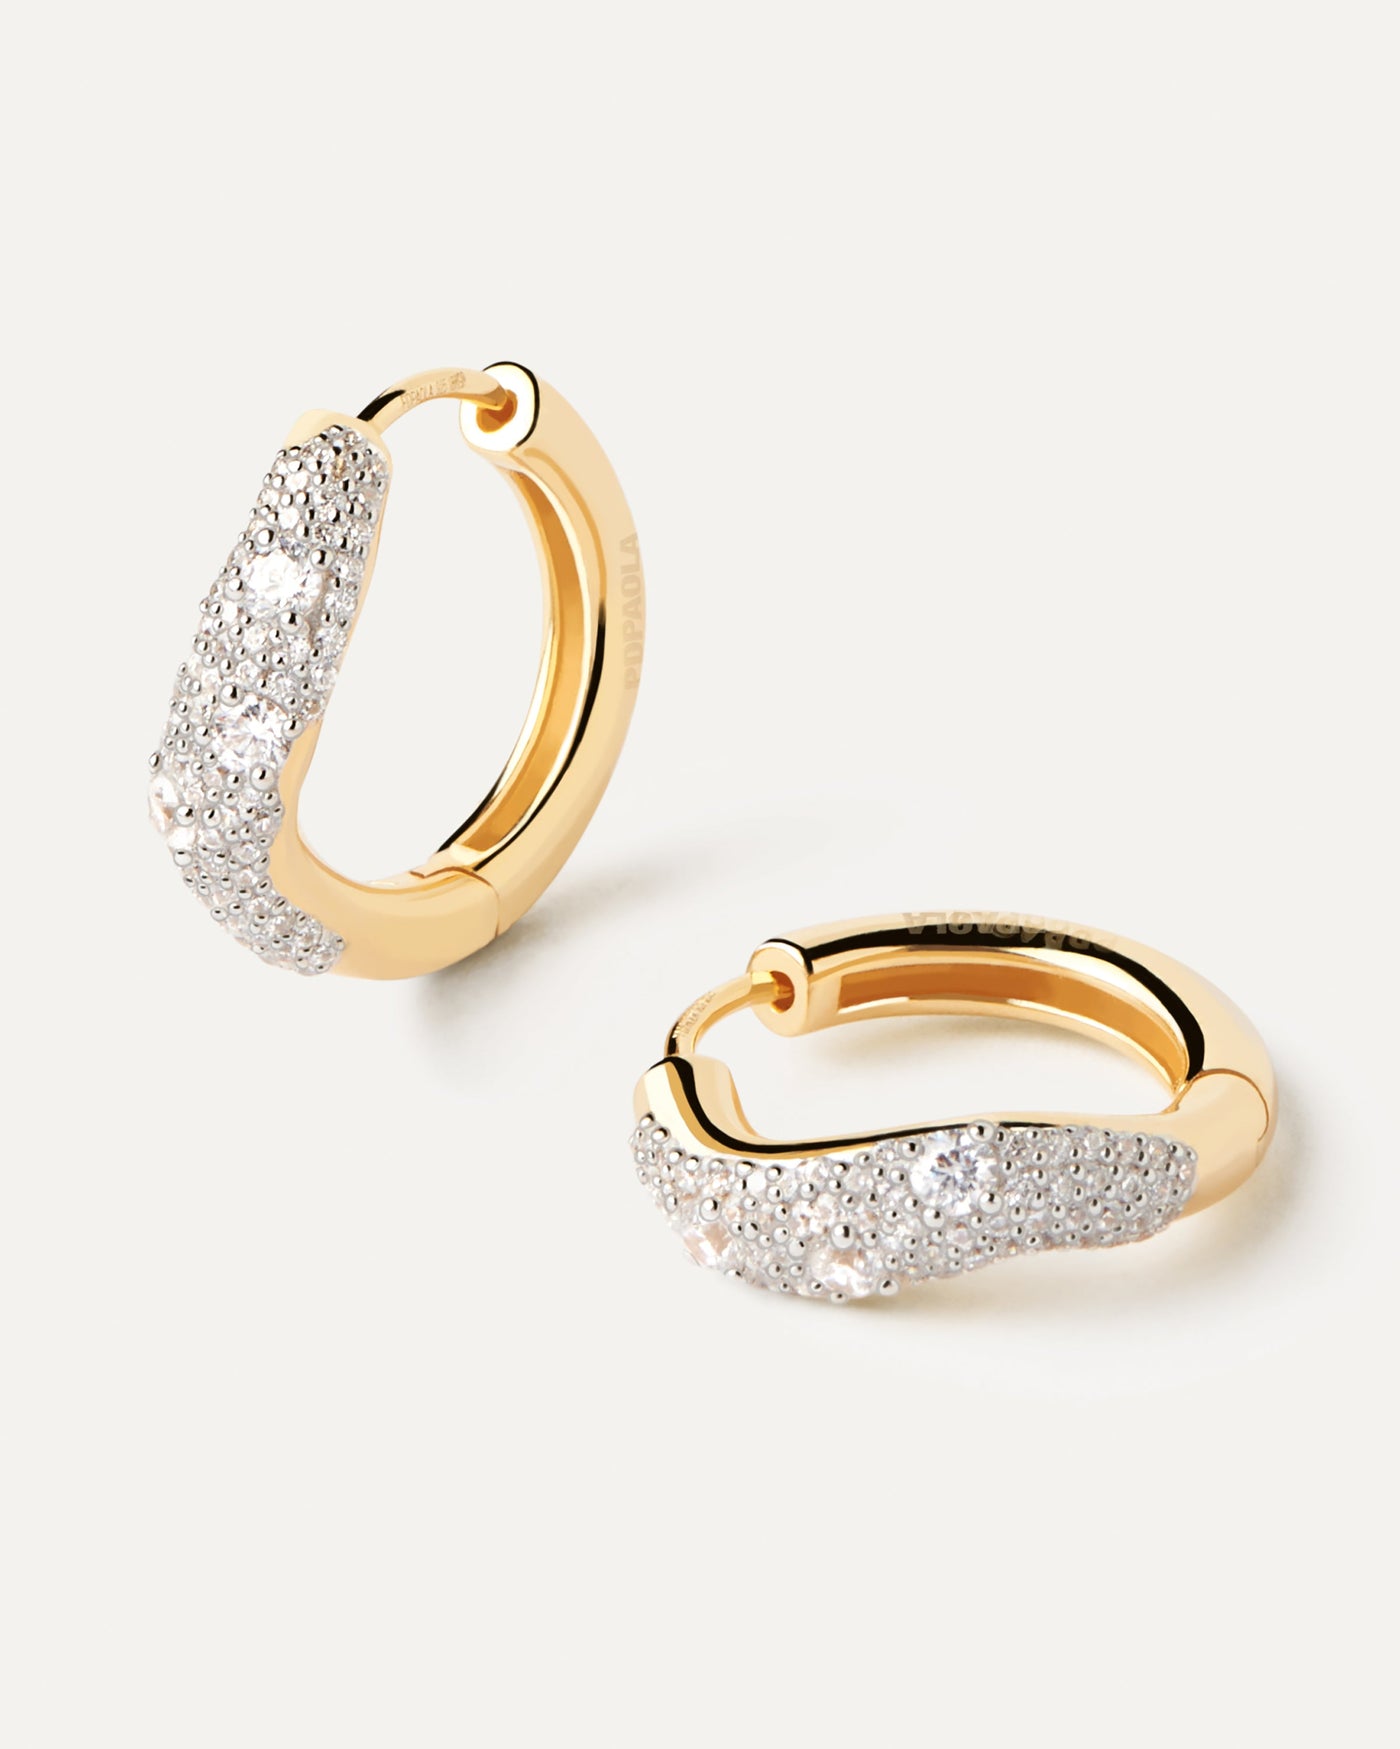 2023 Selection | Diamonds And Gold Apollo Hoops. Wavy hoop earrings in yellow gold with pavé diamonds of 0.9 carats. Get the latest arrival from PDPAOLA. Place your order safely and get this Best Seller. Free Shipping.